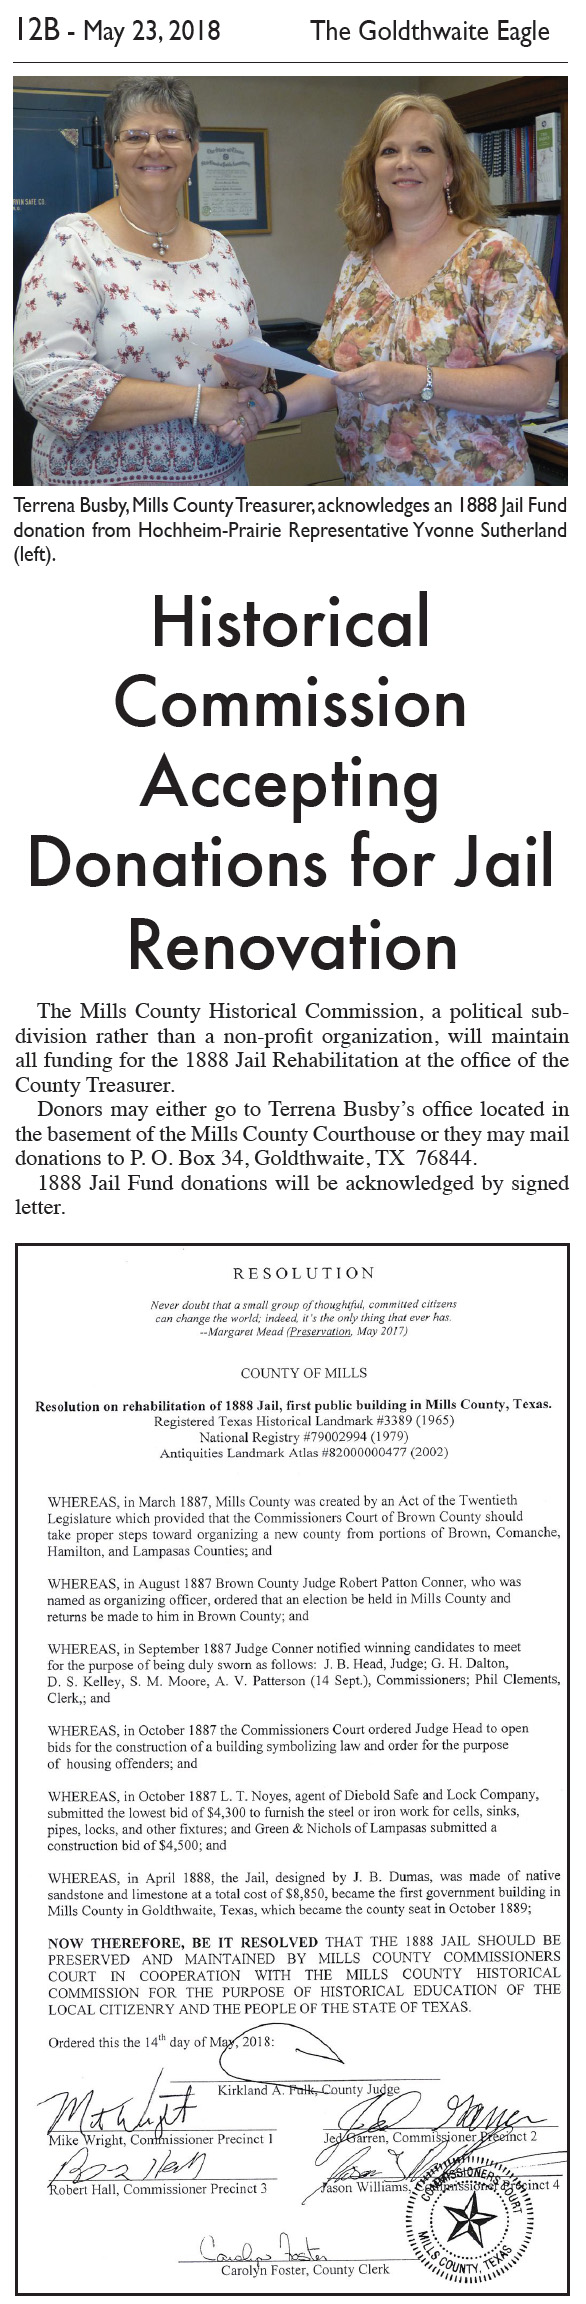 Accepting Donations for Jail Rehabilitation